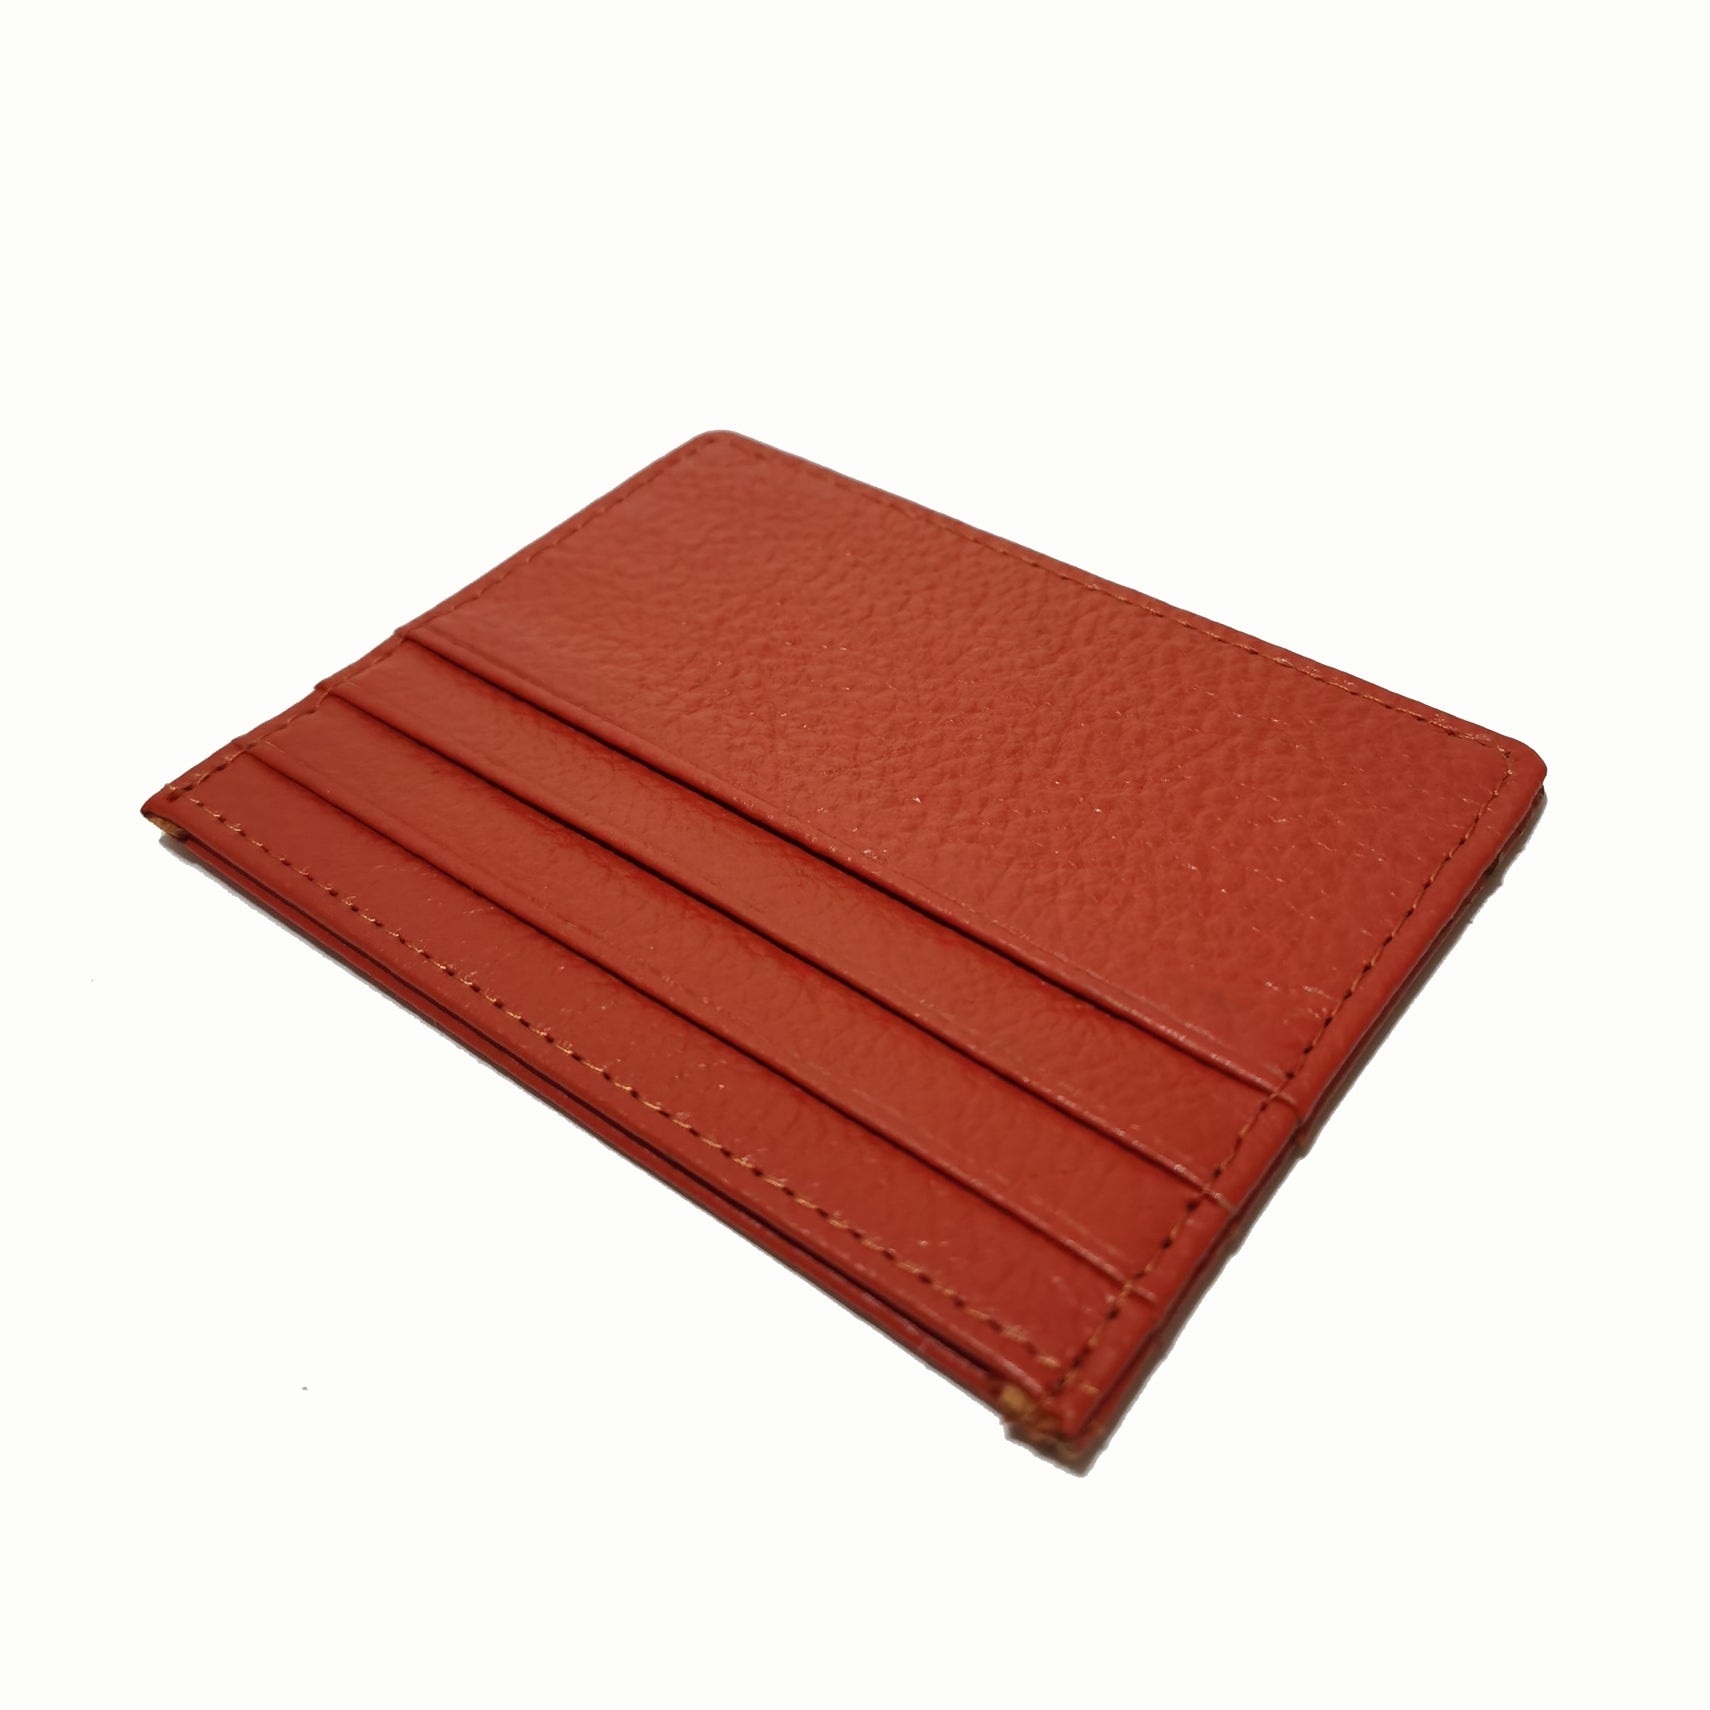 Unisex genuine cowhide leather card holder by Tomorrow Closet